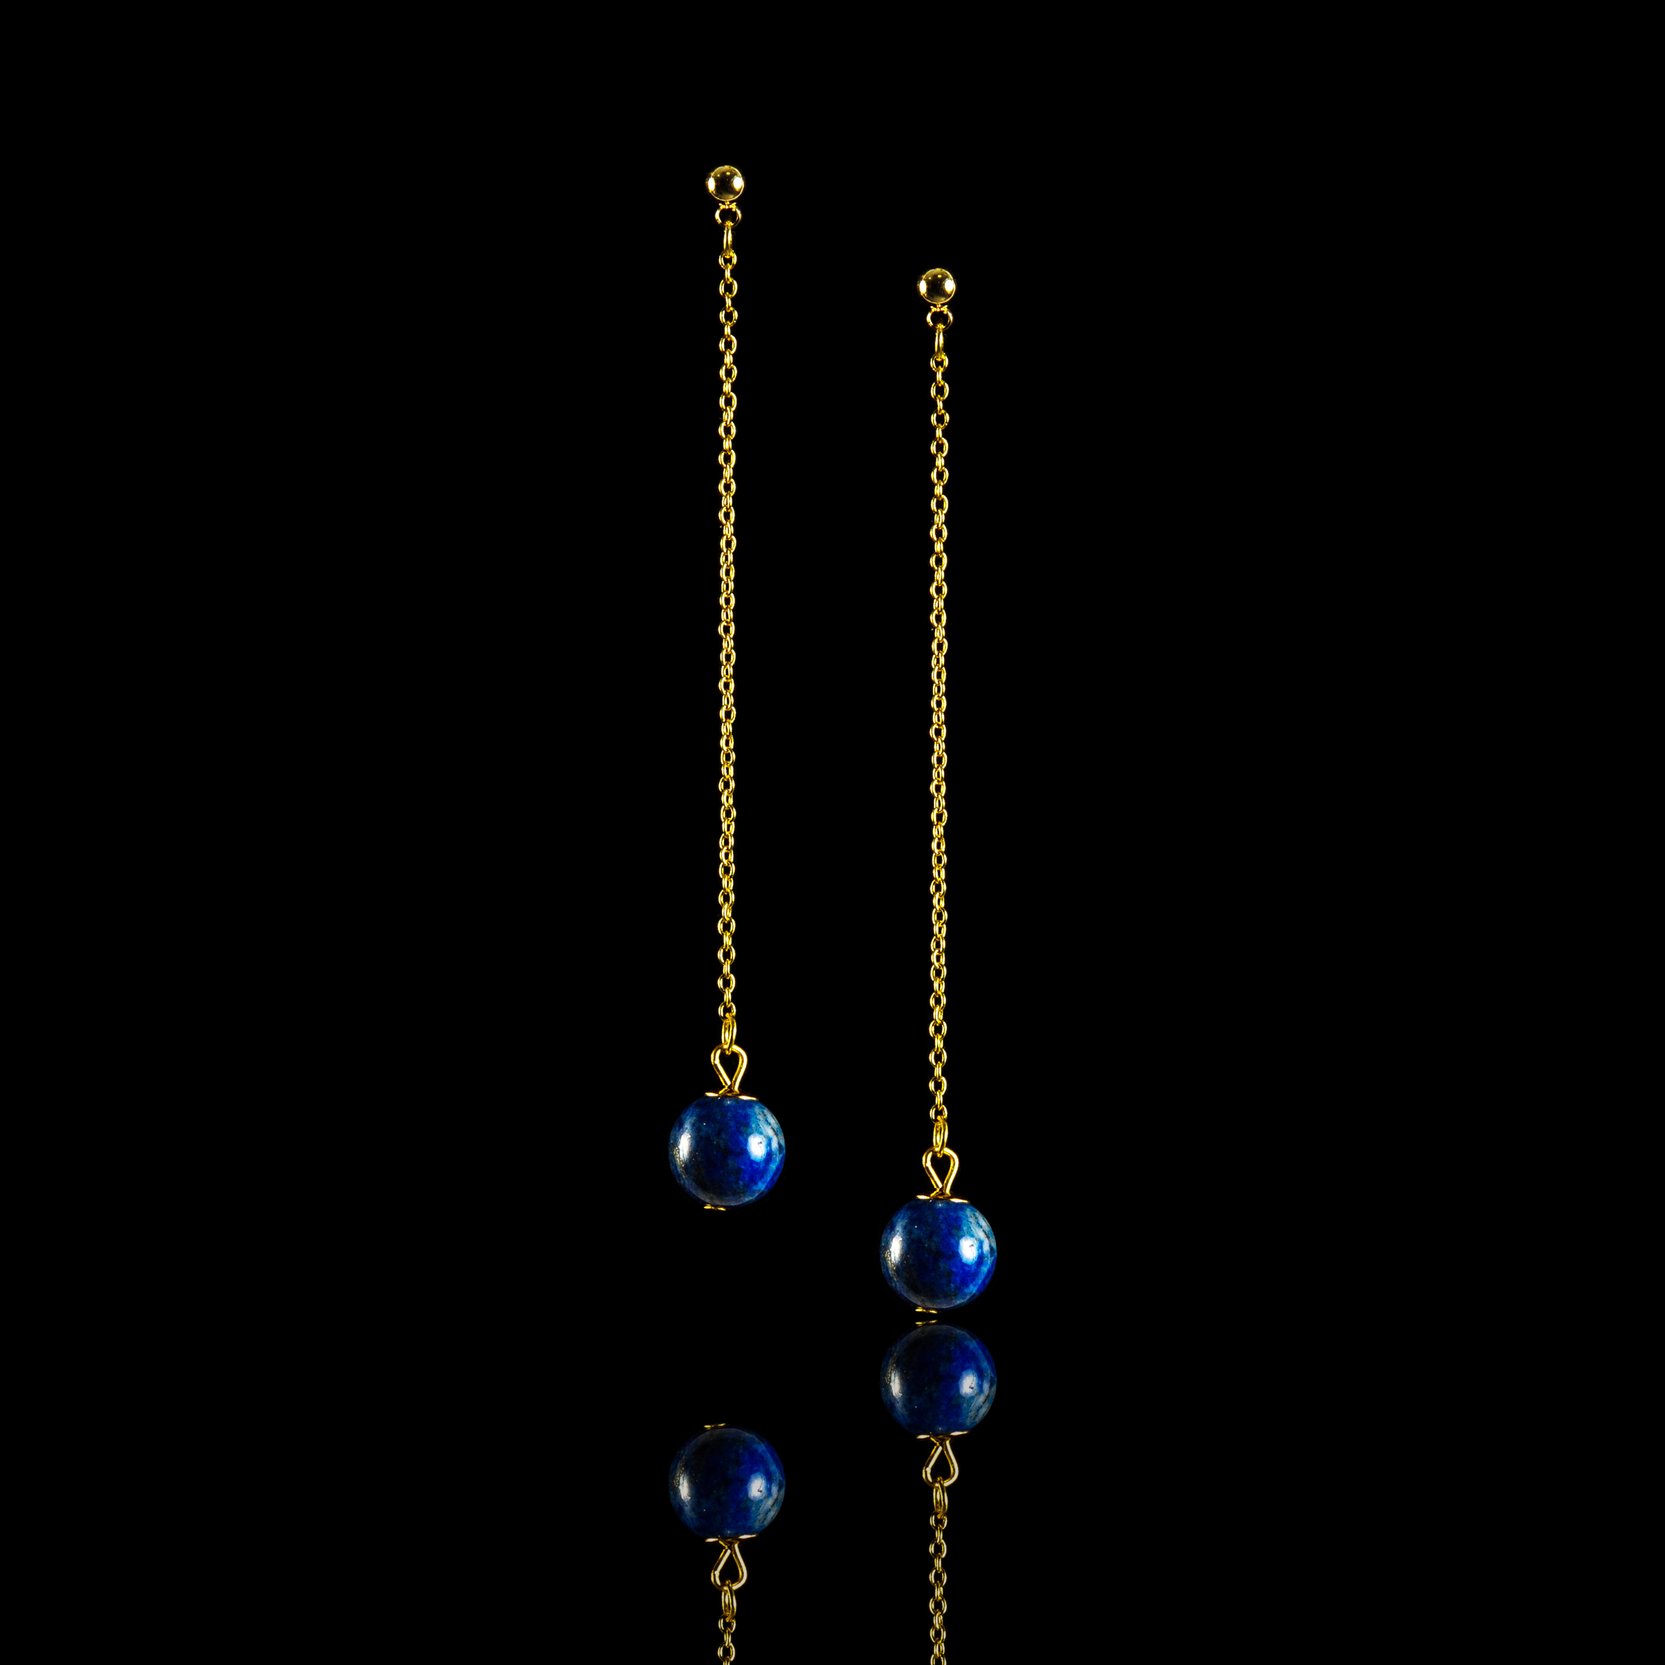 Earrings on a gold-plated chain with lapis lazuli